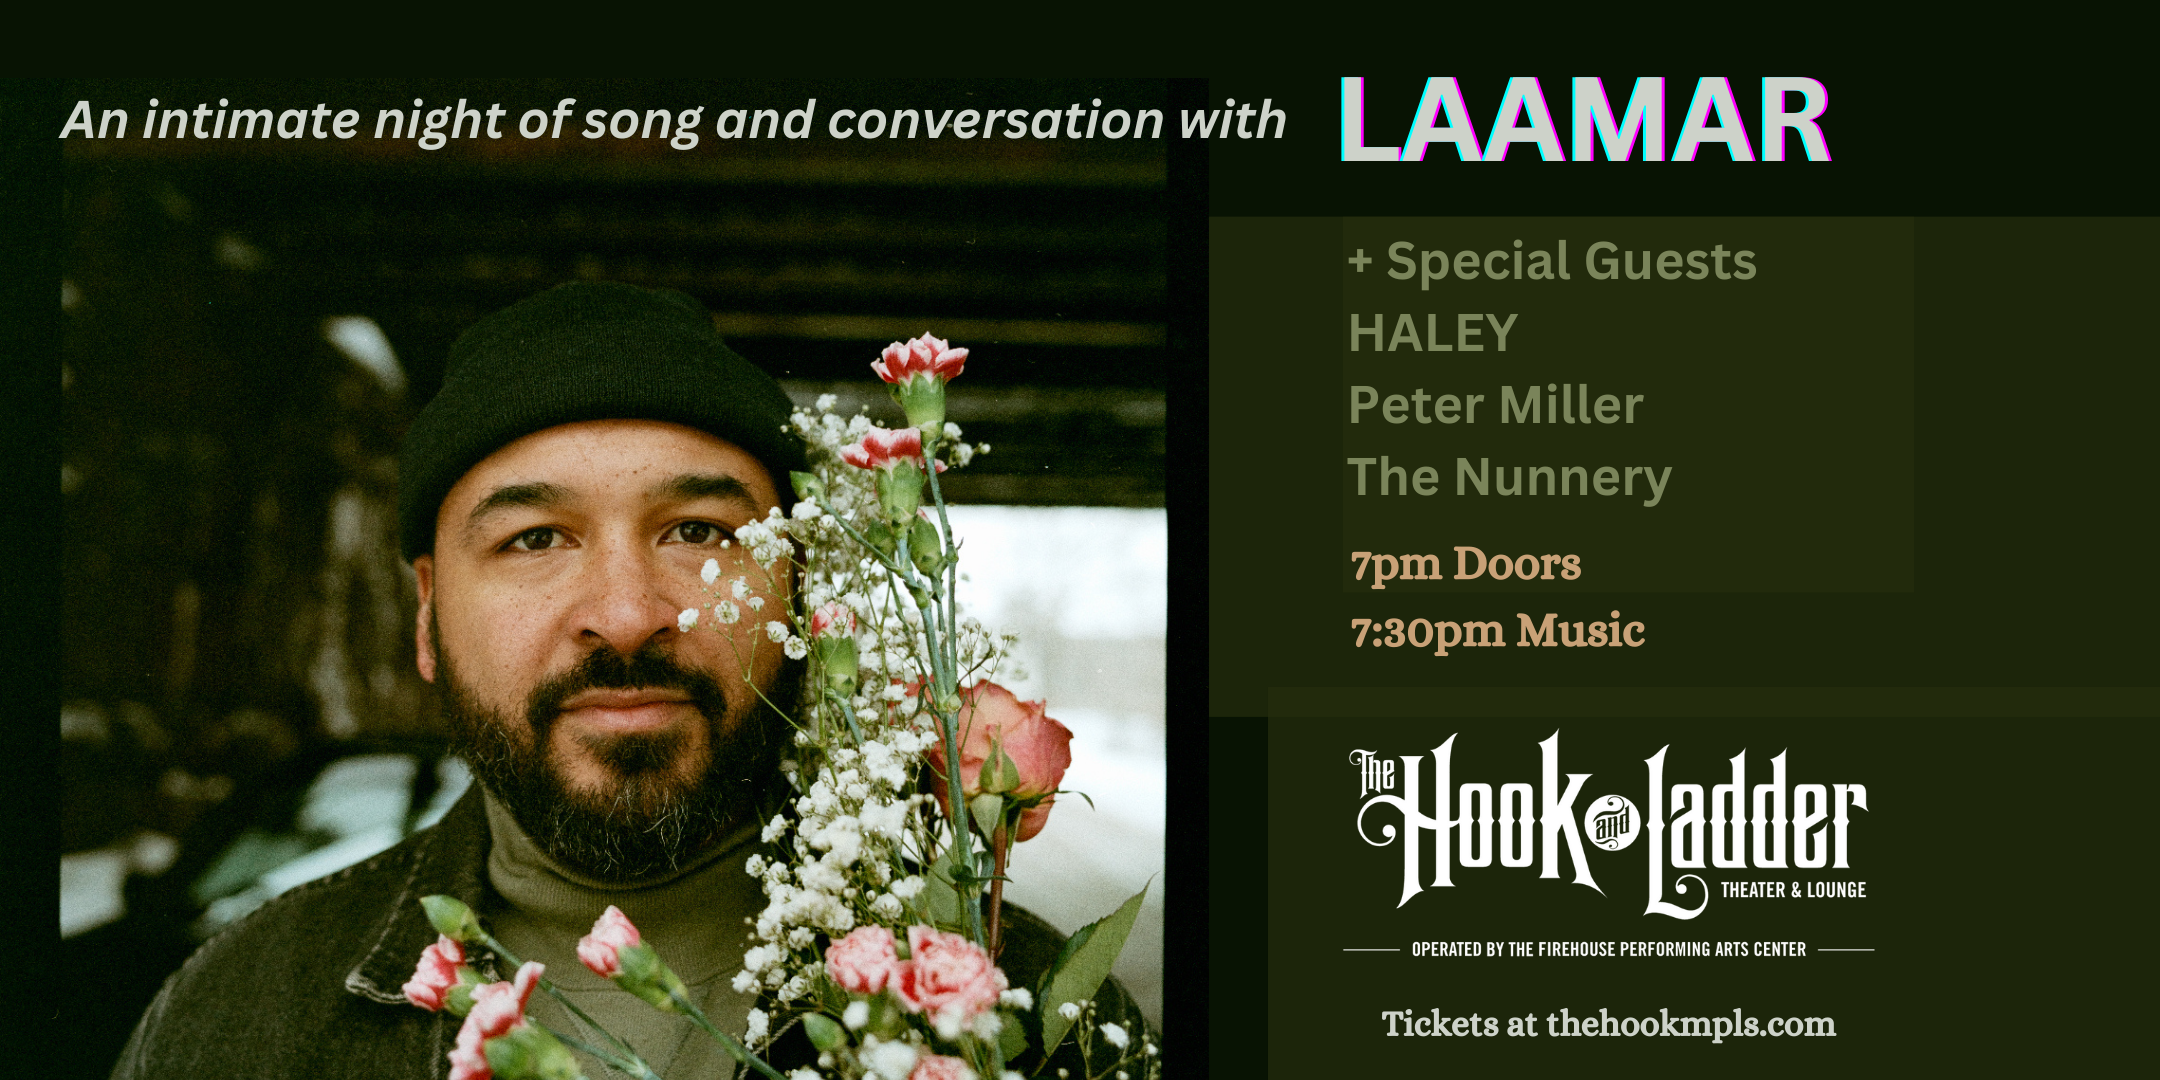 An Intimate Night of Song & Conversation with LAAMAR with special guests HALEY, Peter Miller, and The Nunnery Thursday, February 22 The Mission Room at Hook and Ladder Theater Doors 7:00pm :: Music 7:30pm :: 21+ GA Seat: $25* Standing Room Only (SRO): $15 ADV / $20 DOS *Seating Available On A First-come First-served Basis